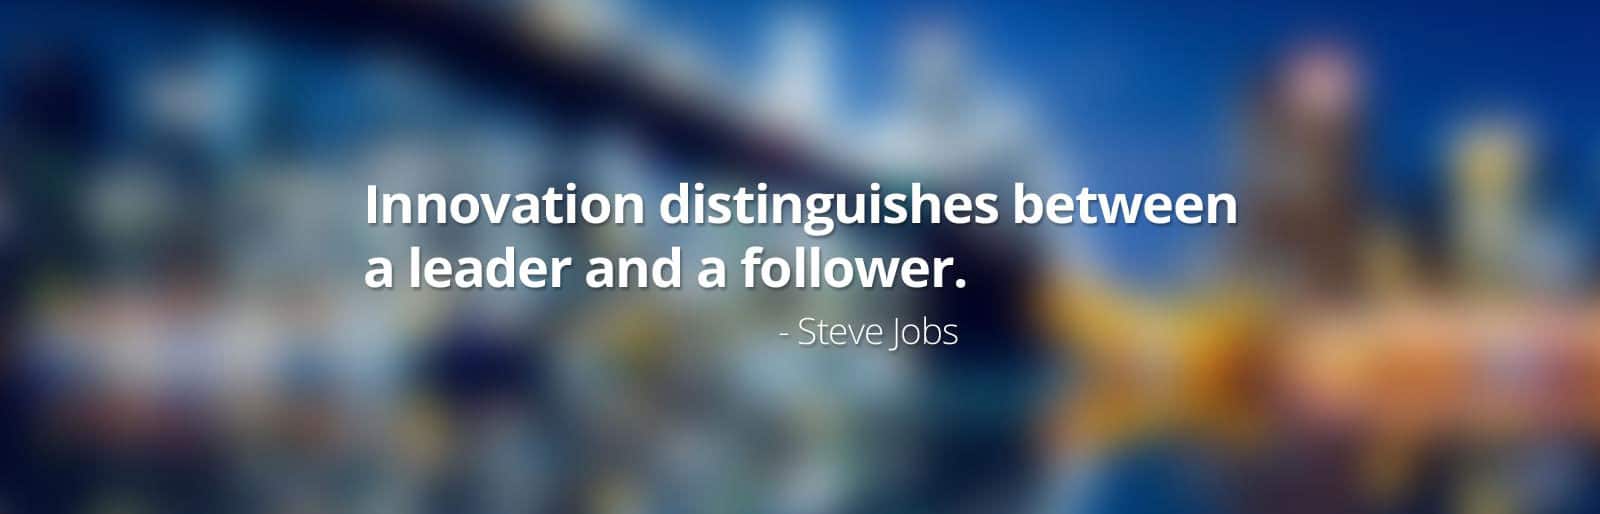 Innovation distinguishes between a leader and a follower -Steve Jobss